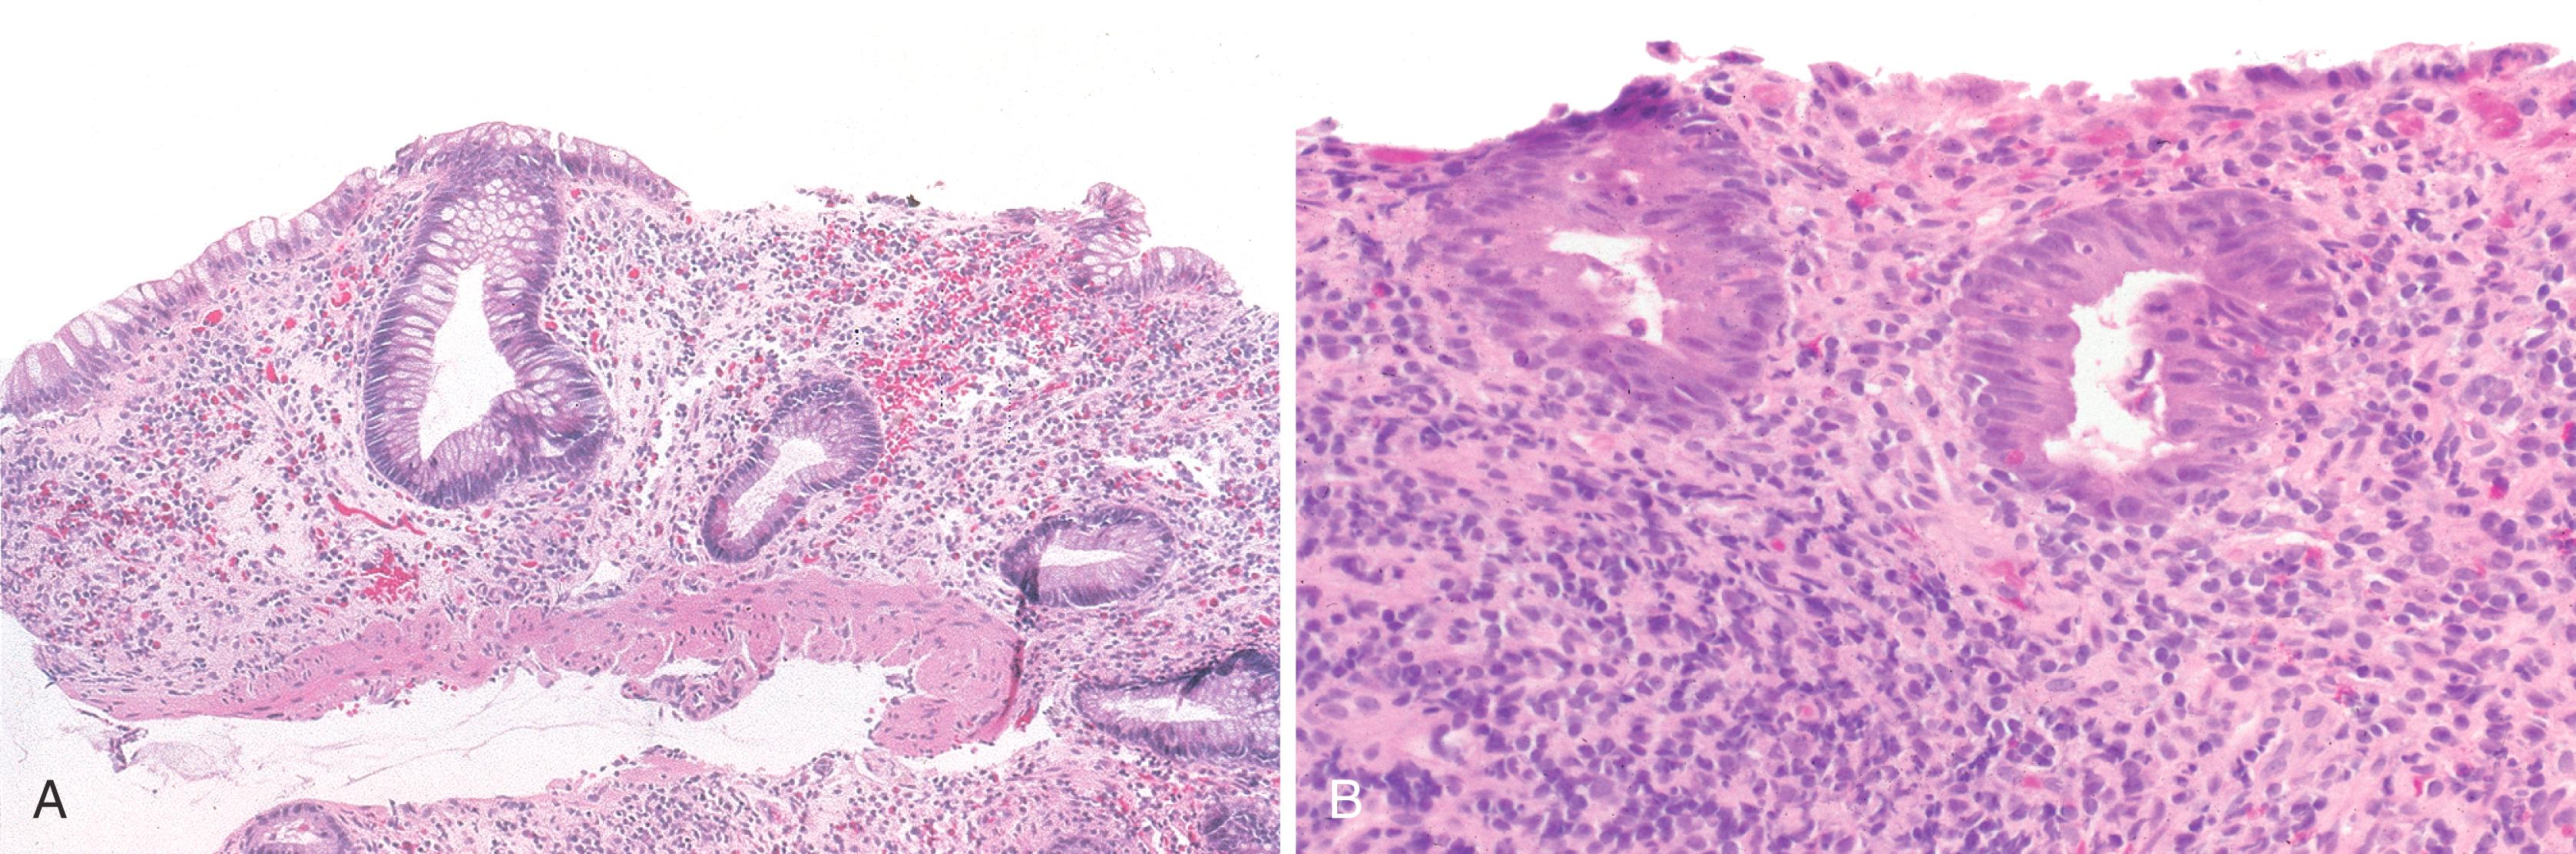 FIGURE 5.6, Colitis in common variable immunodeficiency may mimic inflammatory bowel disease, with crypt distortion and loss. A, The inflammatory infiltrate is relatively sparse in some cases, compared with ulcerative colitis, and plasma cells are not present. B, Notice crypt shortfall and infiltration of crypts by acute inflammatory cells (acute cryptitis).